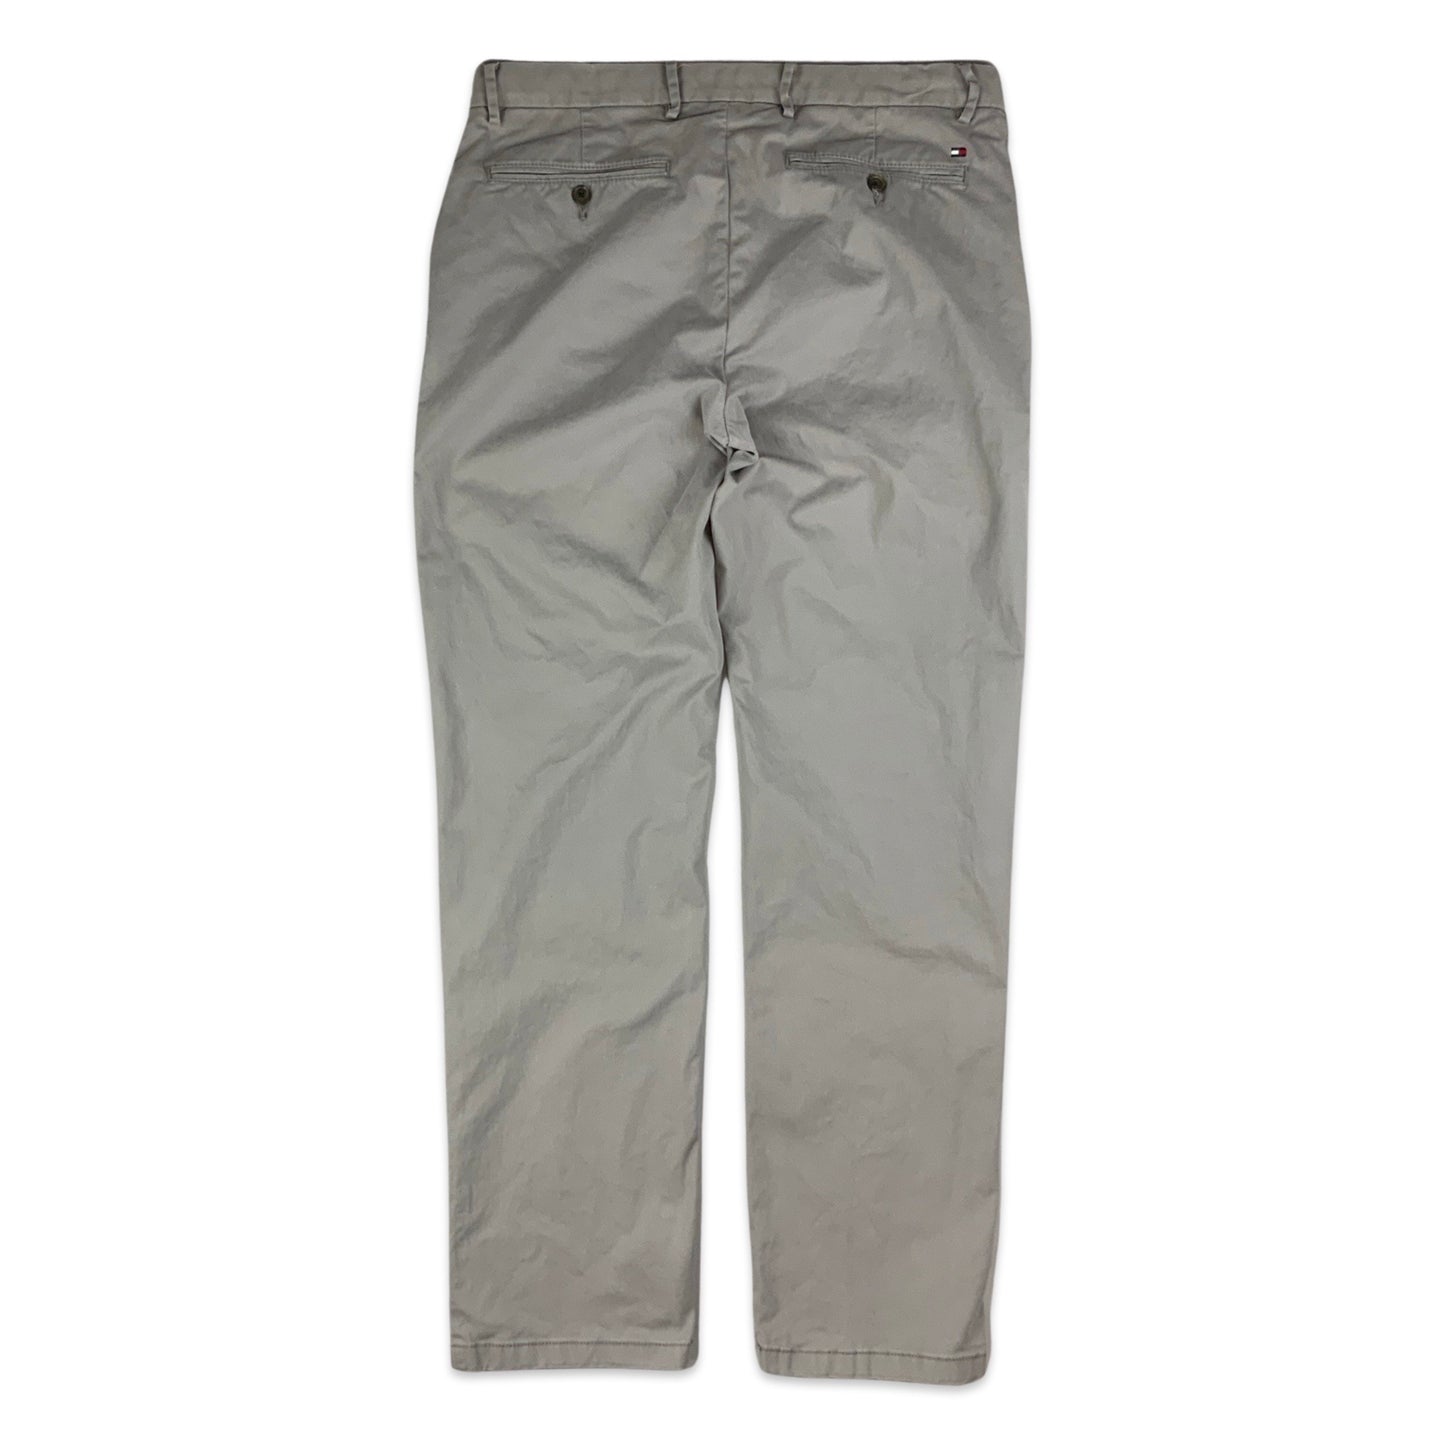 Tommy Hilfiger Grey Chino Trousers 36W 32L